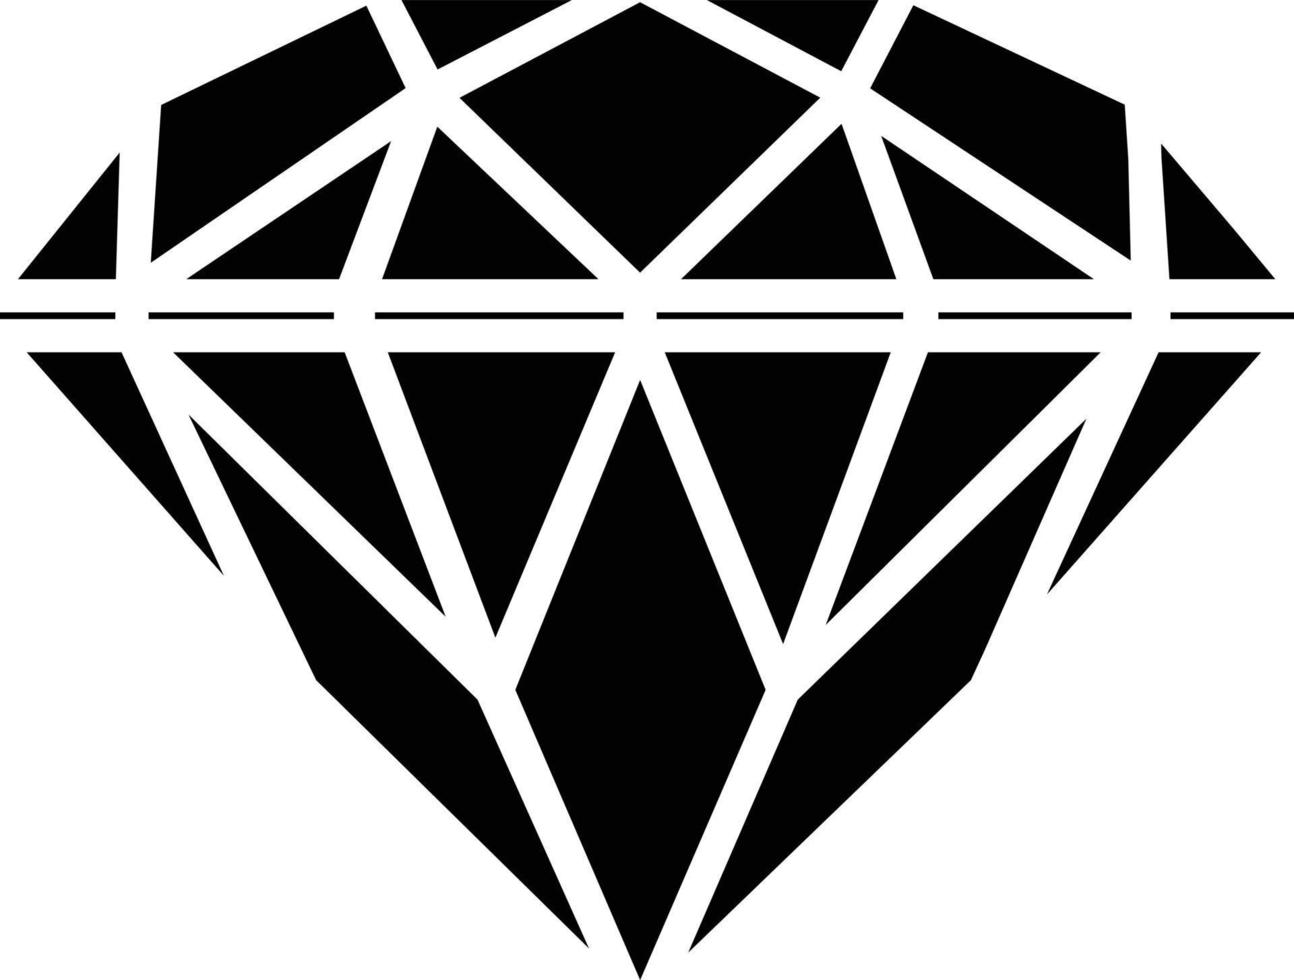 black and white diamond. diamonds in a flat style. diamond collection icons. Cristal Shine sign design vector